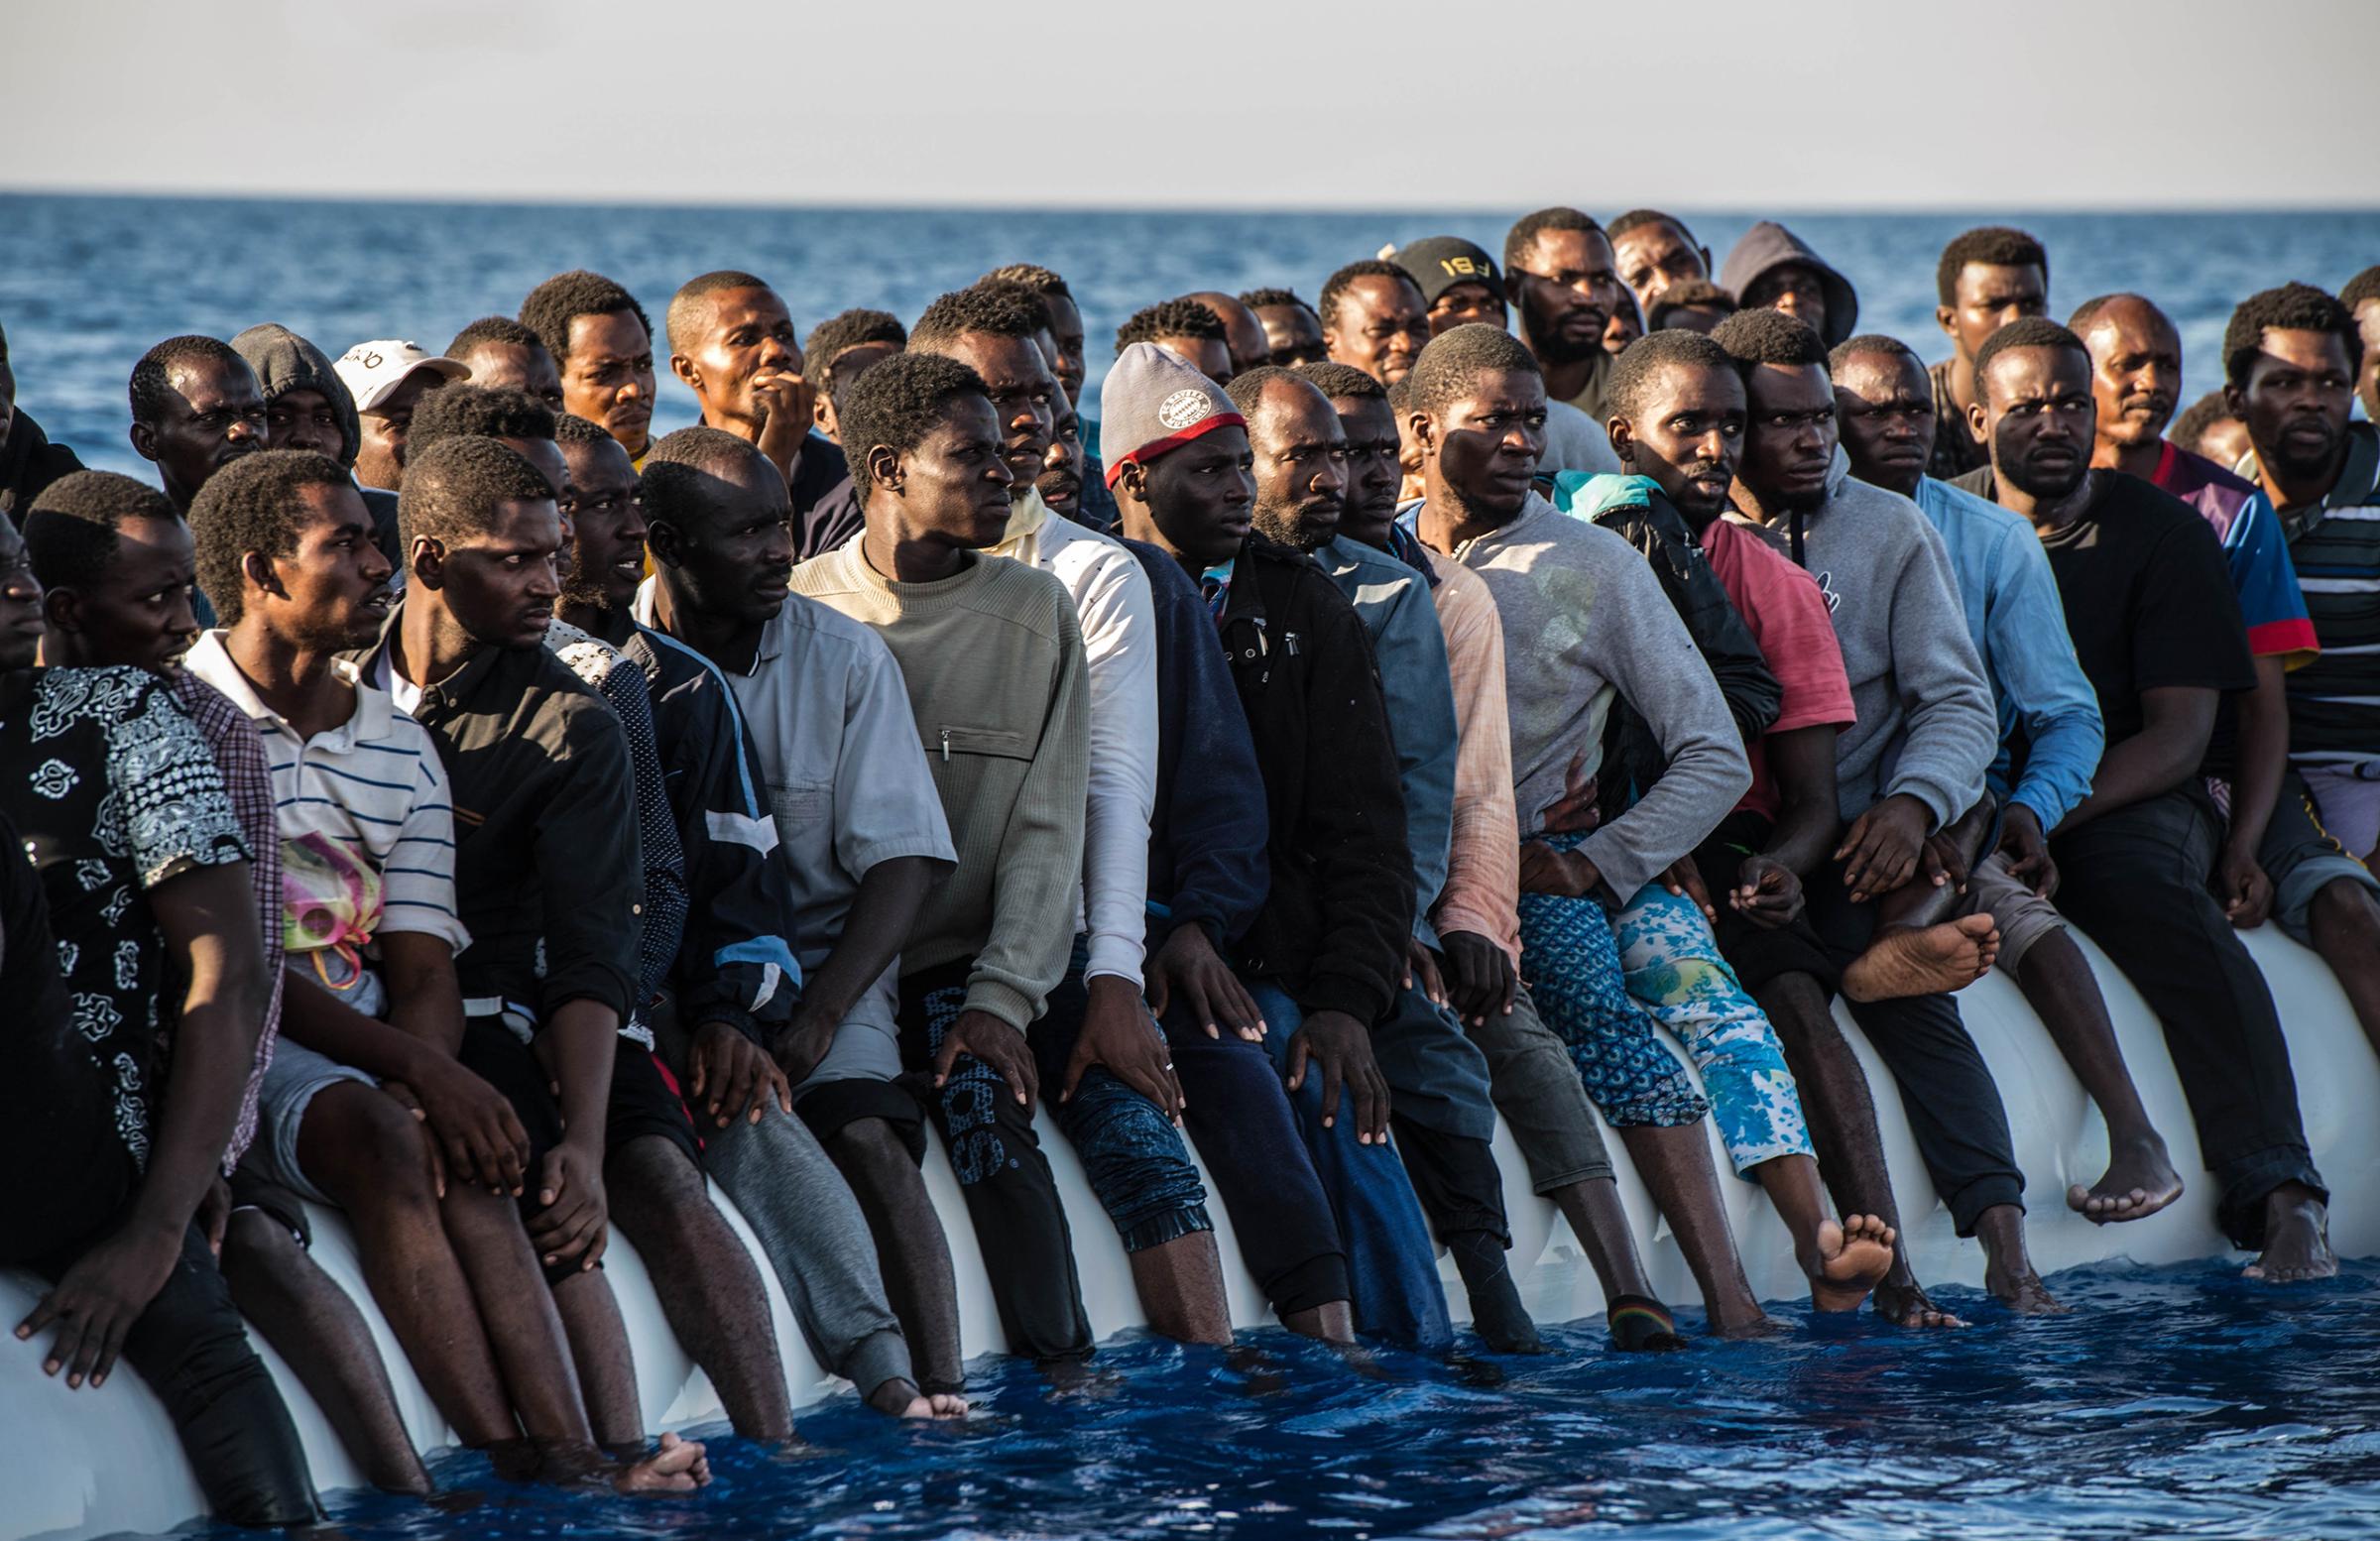 Migrants on the rubber boat in Mediterranean are rescued, Aug. 20, 2016.